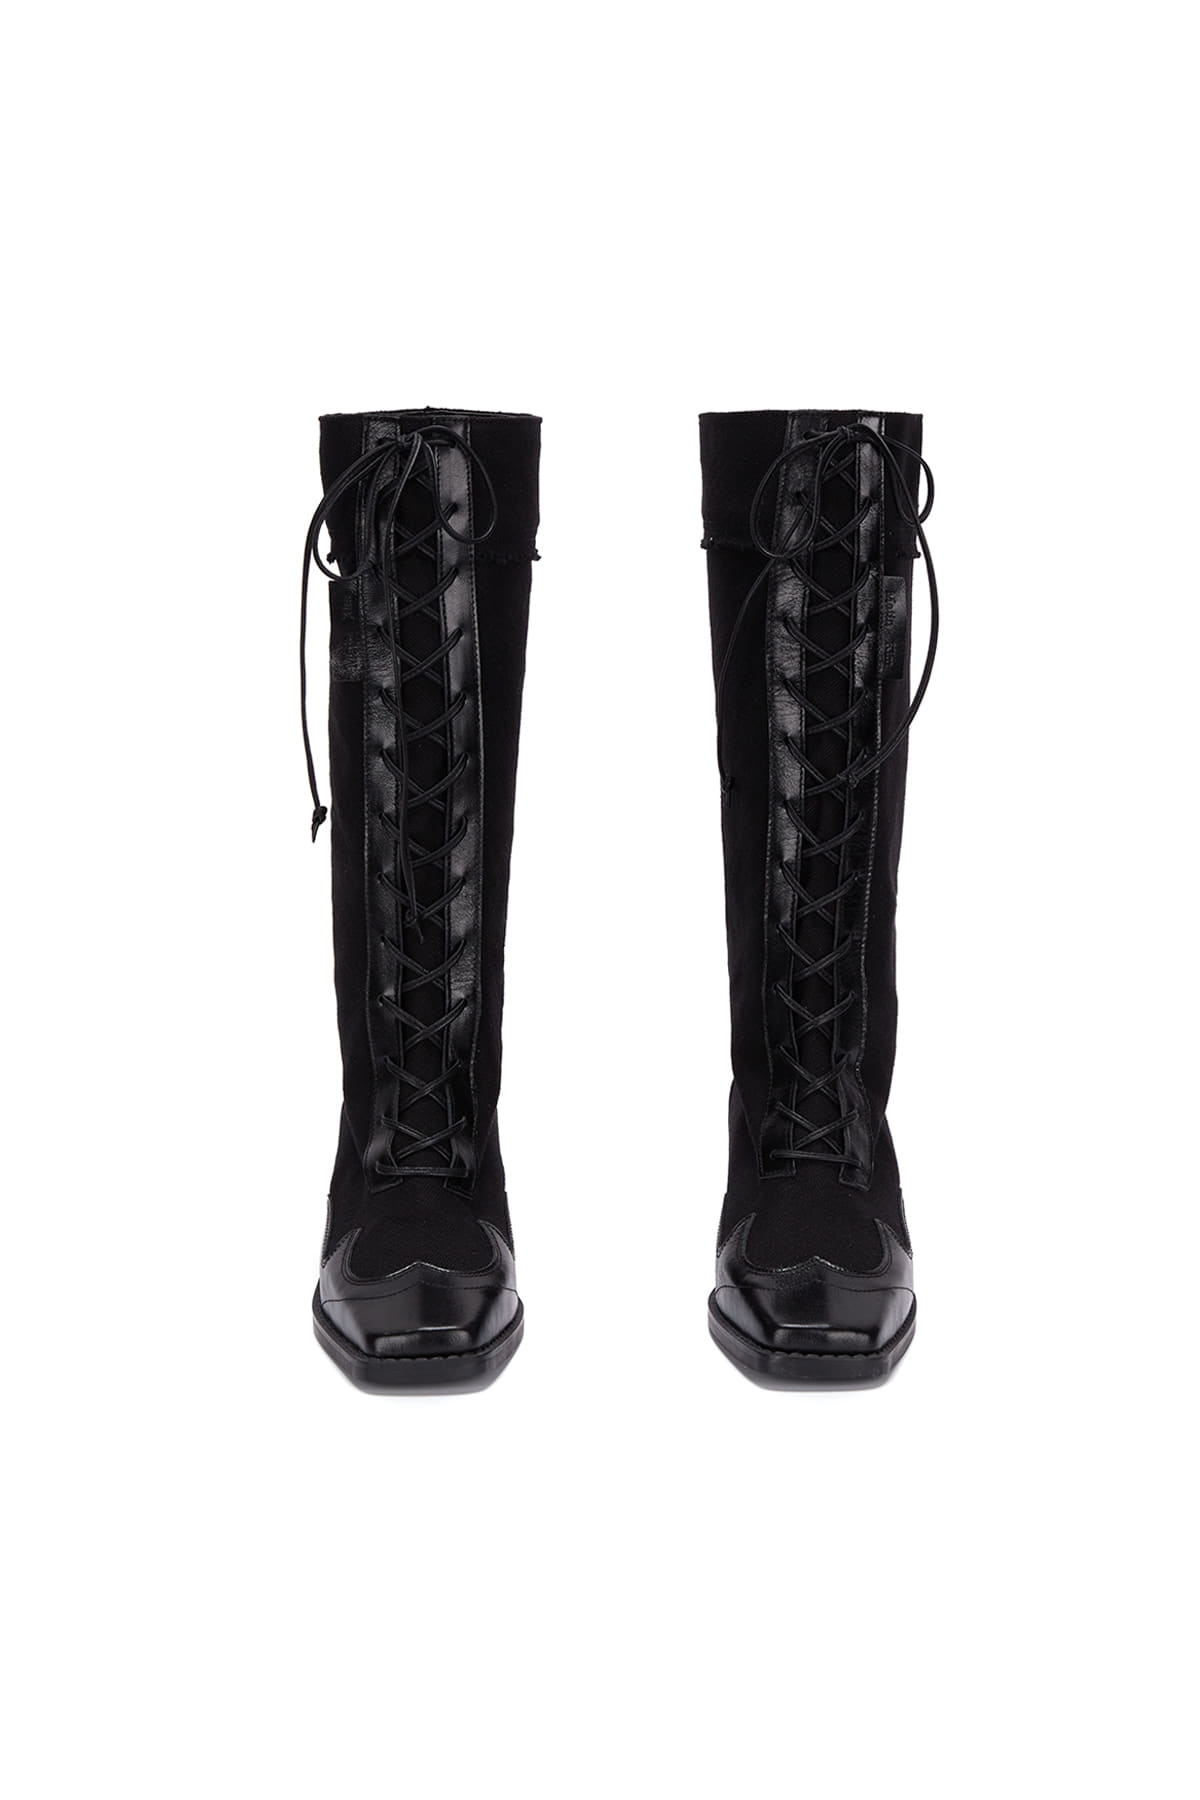 FRONT RACE UP BOOTS IN BLACK